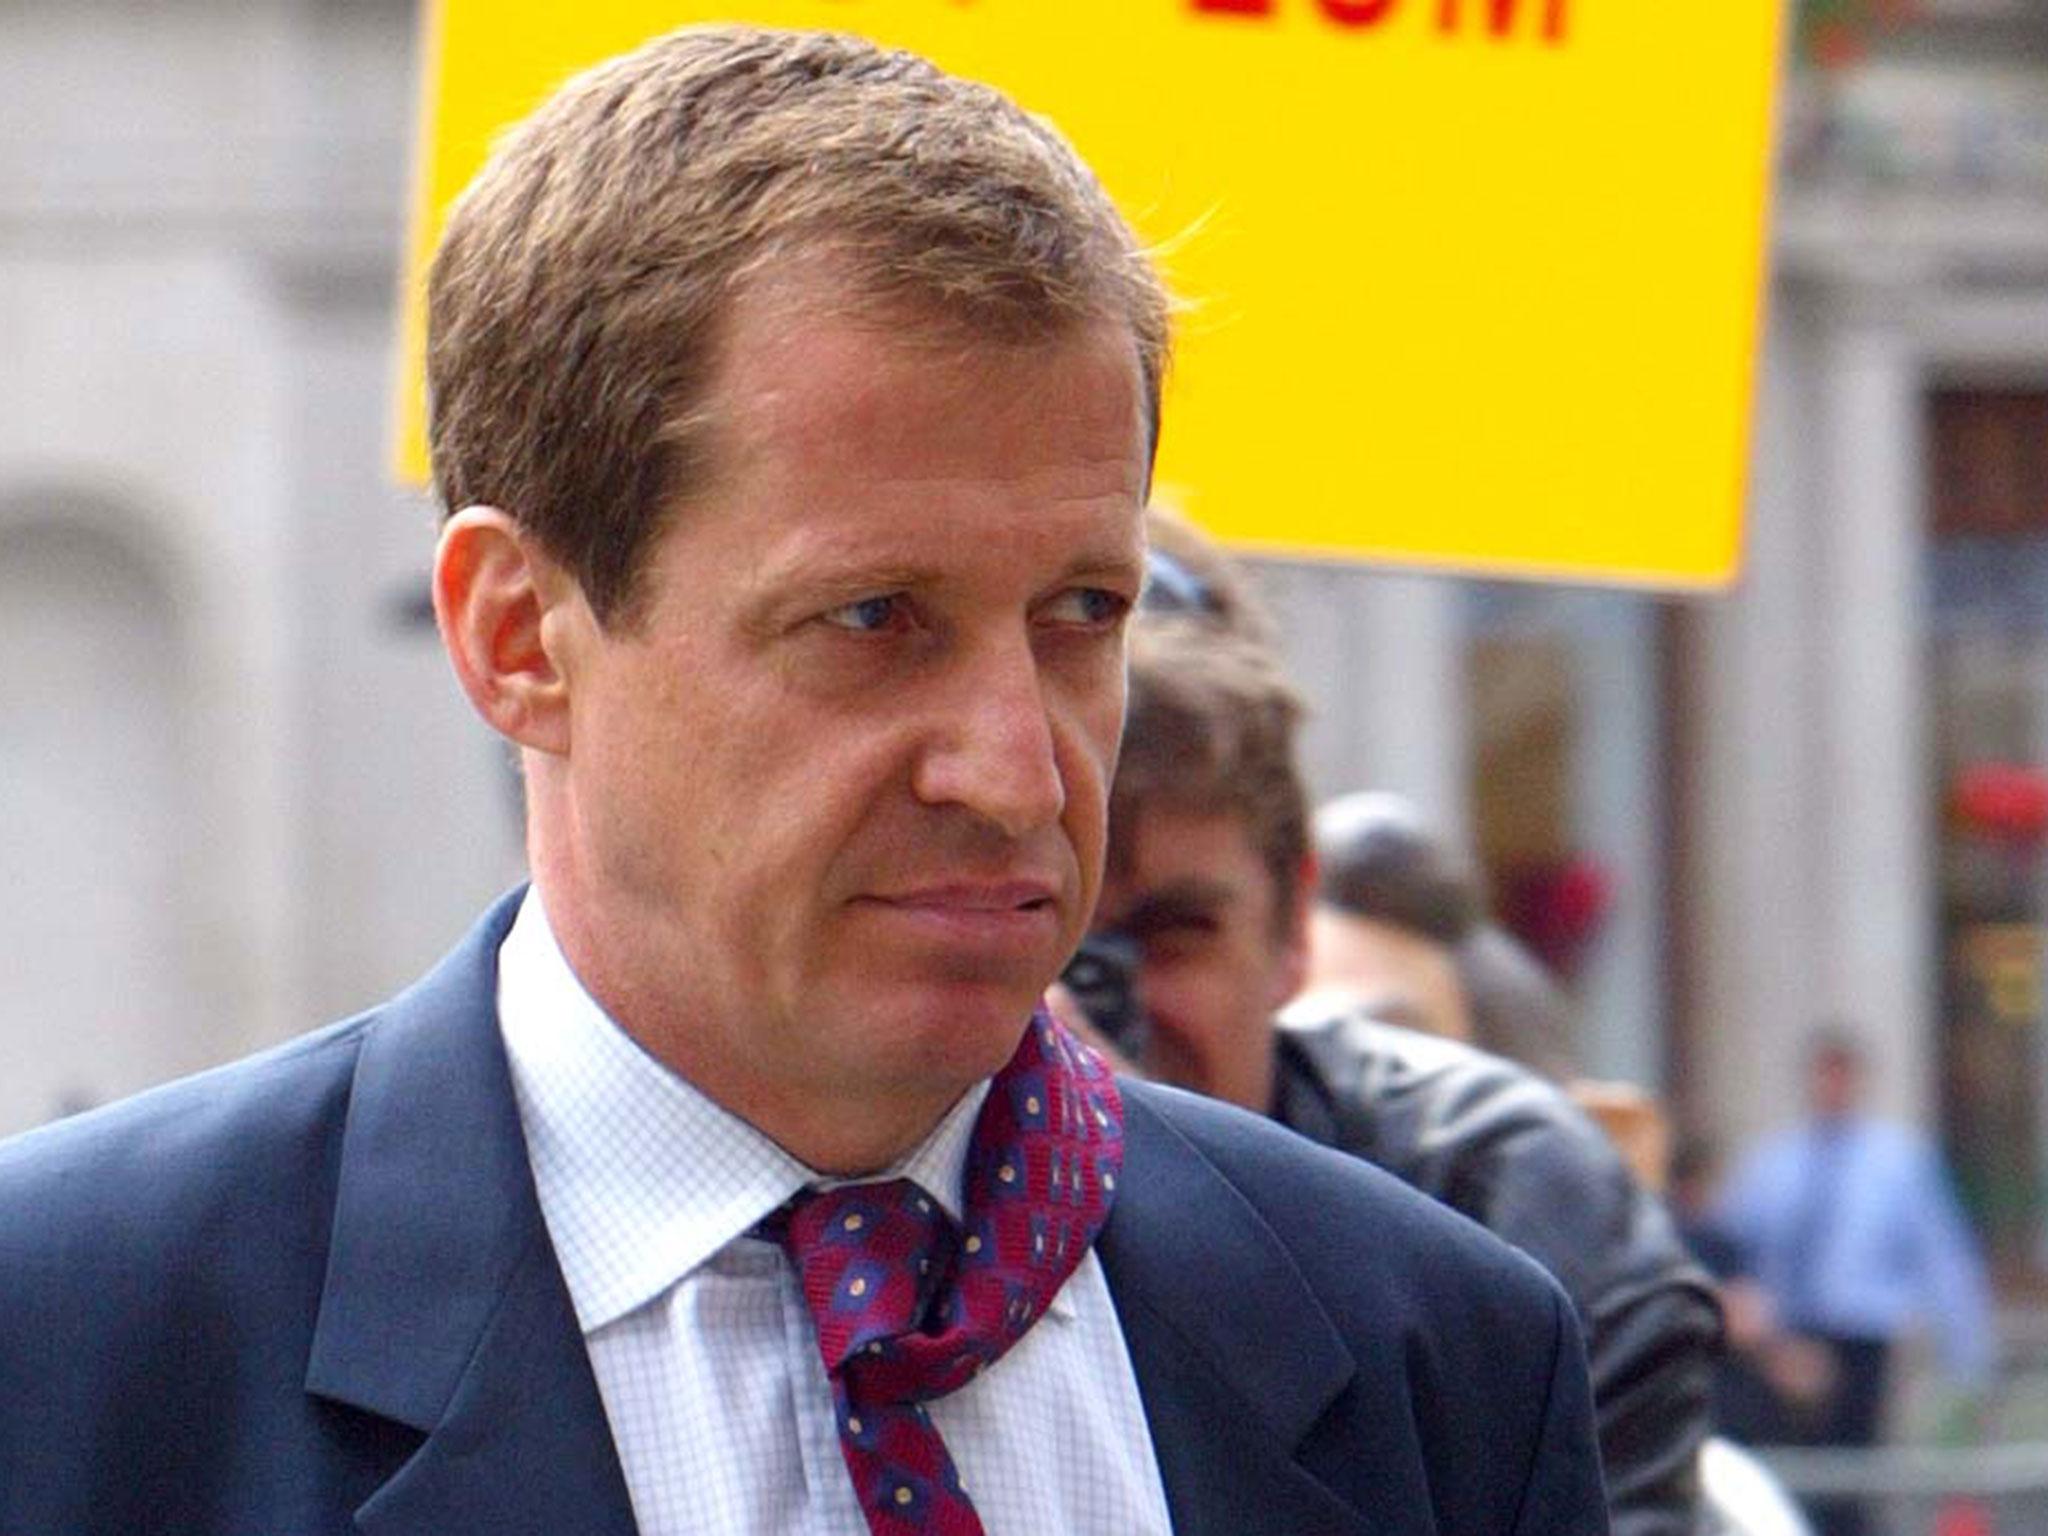 September 2003: Alastair Campbell arrives for The Hutton Inquiry hearing set up after the death of weapons expert Dr David Kelly